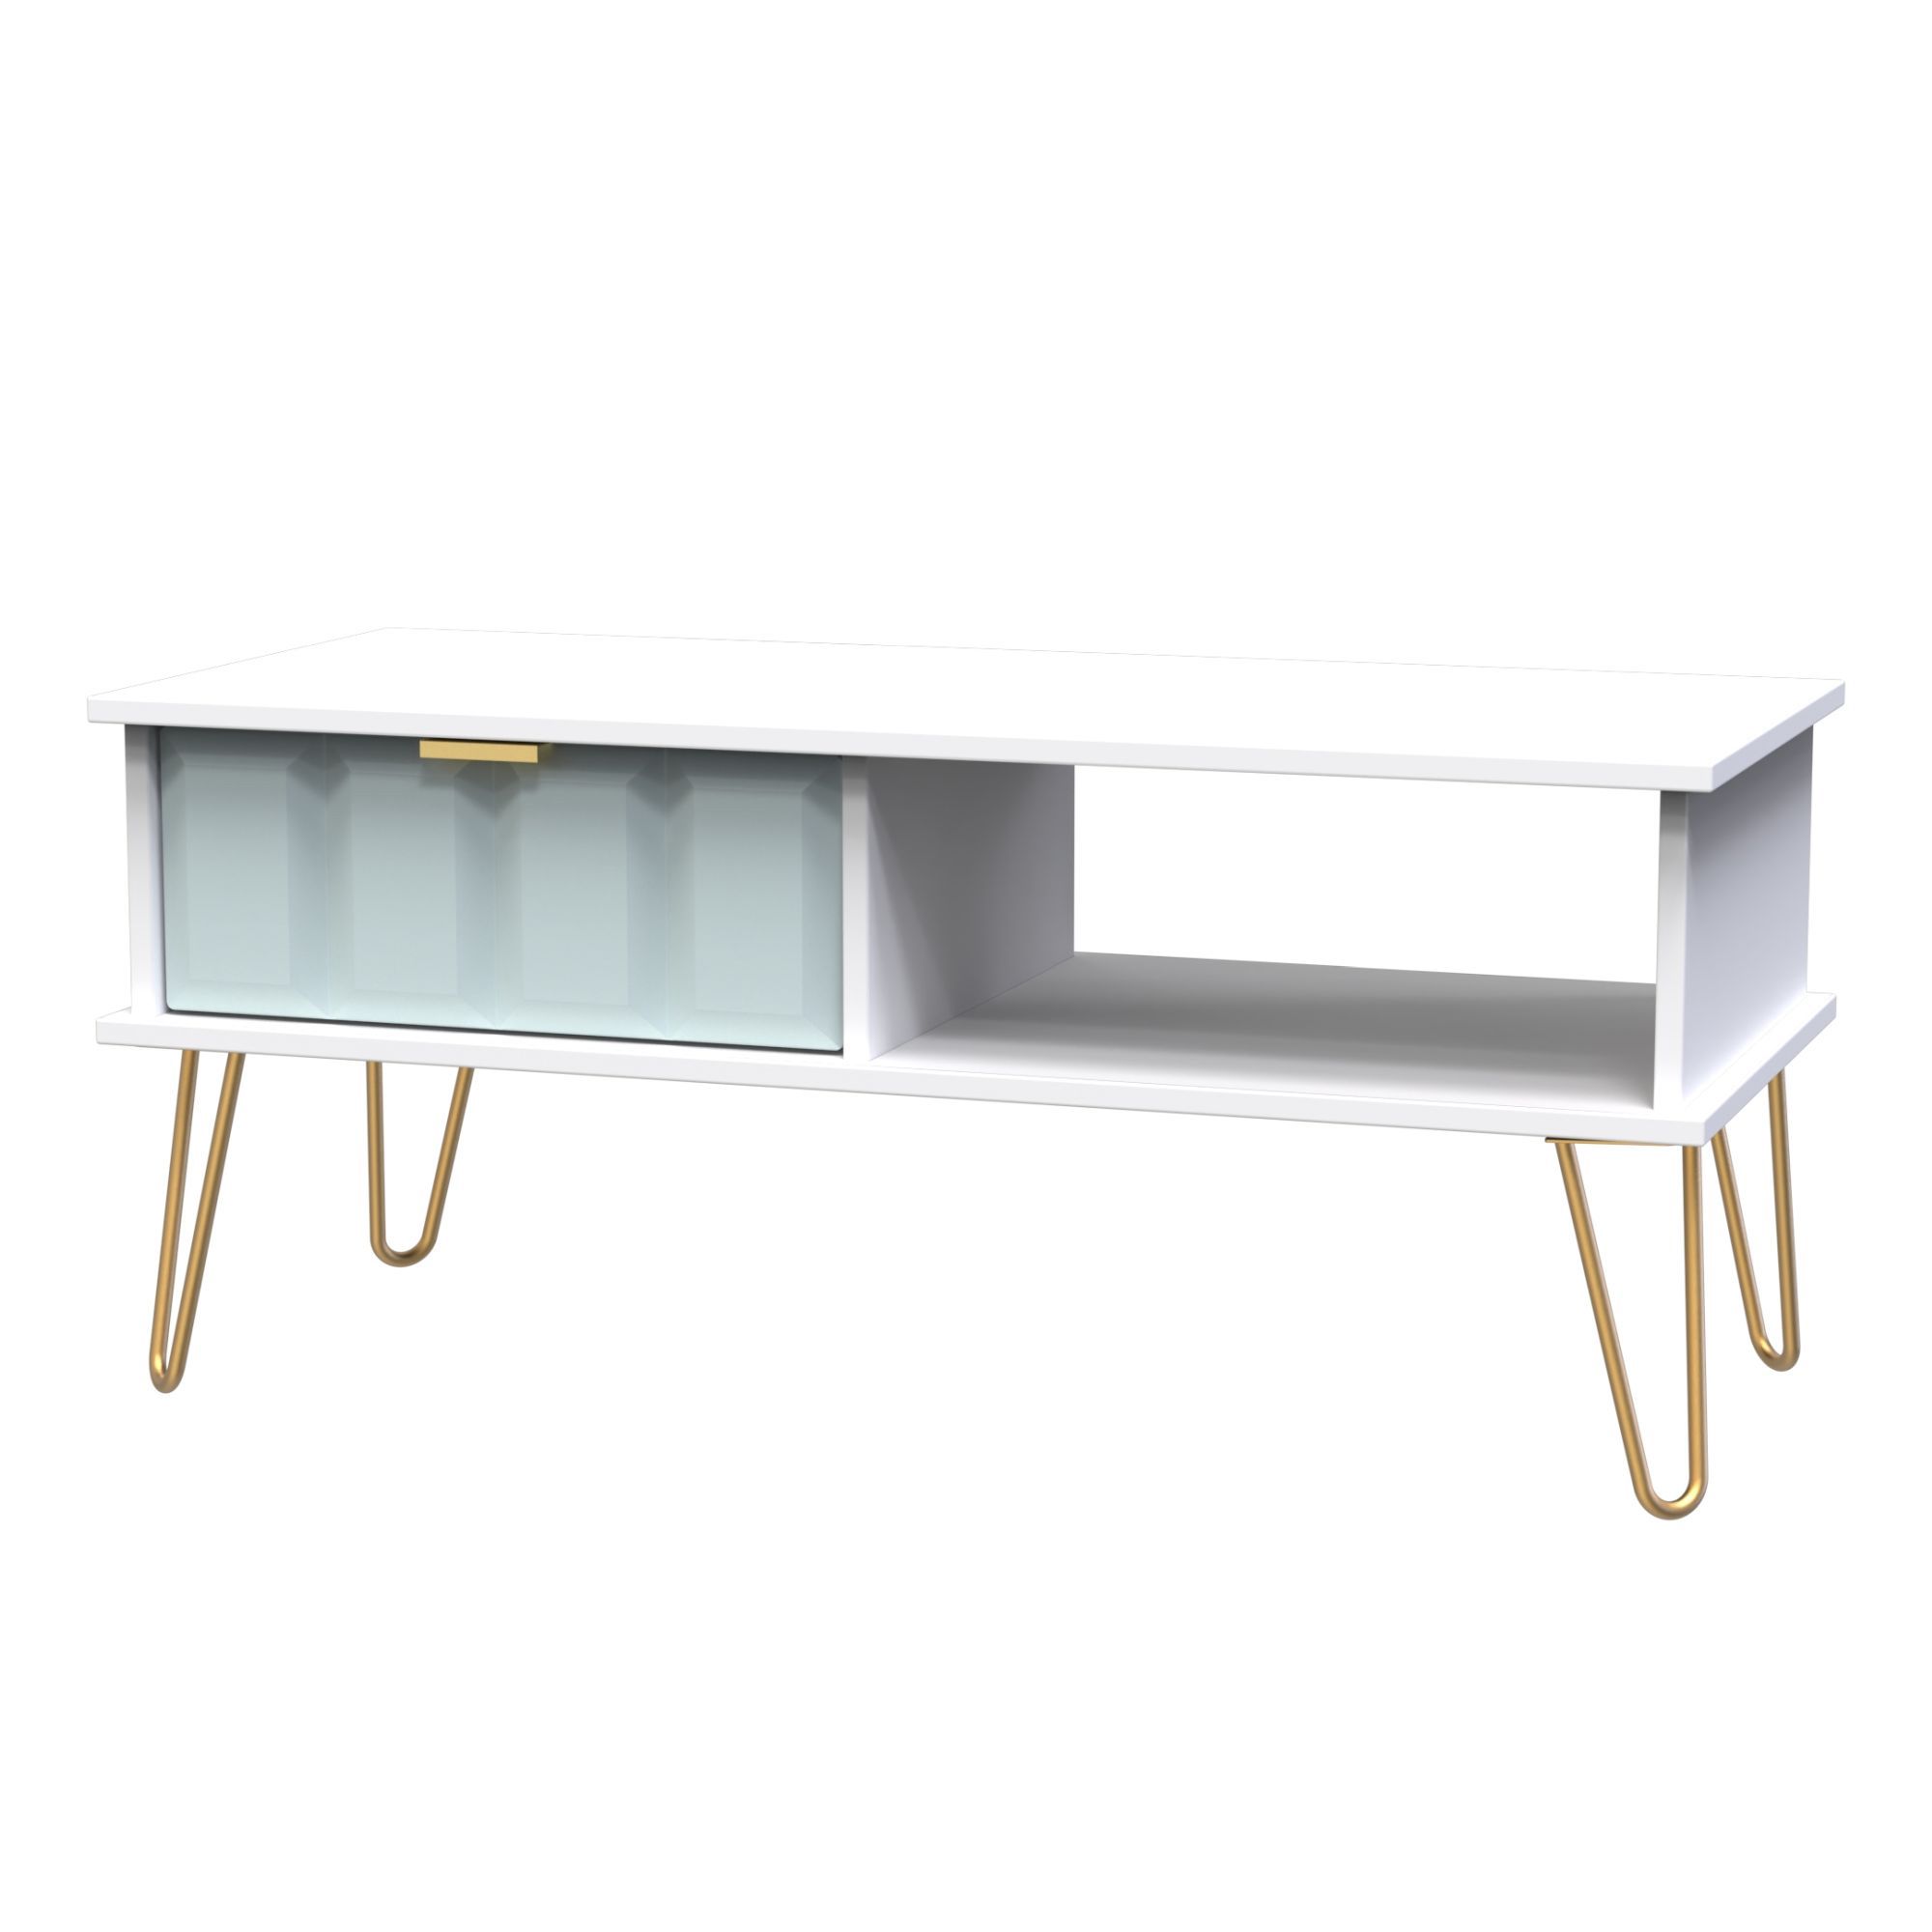 Cube Ready assembled Matt duck egg & white 1 Drawer Small Coffee table (H)455mm (W)905mm (D)395mm